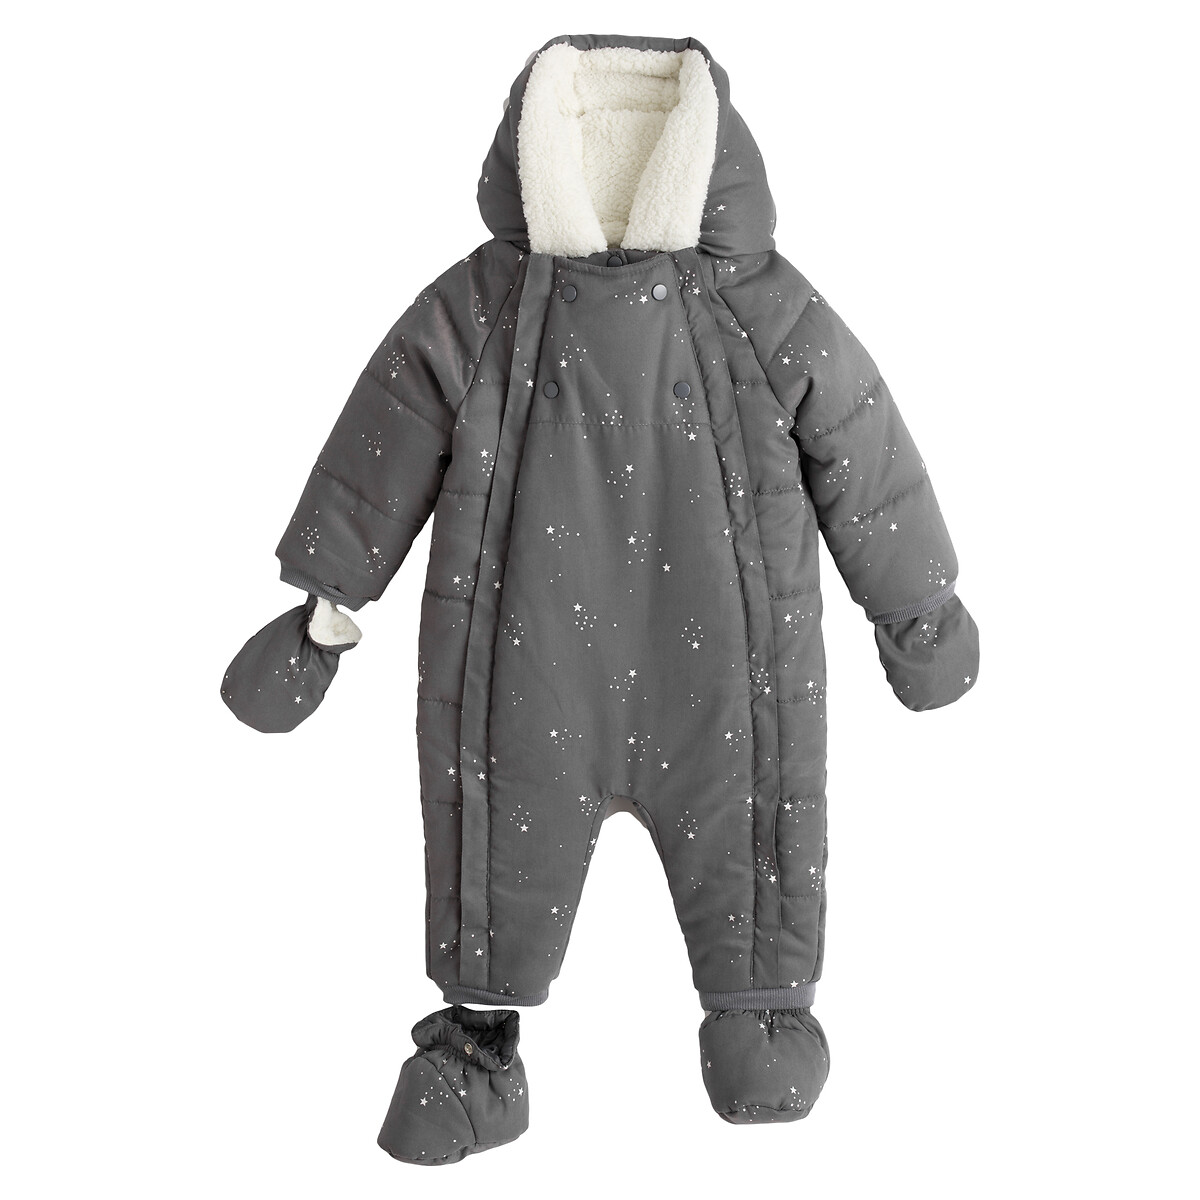 Recycled Warm Hooded Snowsuit in Star Print, 1 Month-2 Years